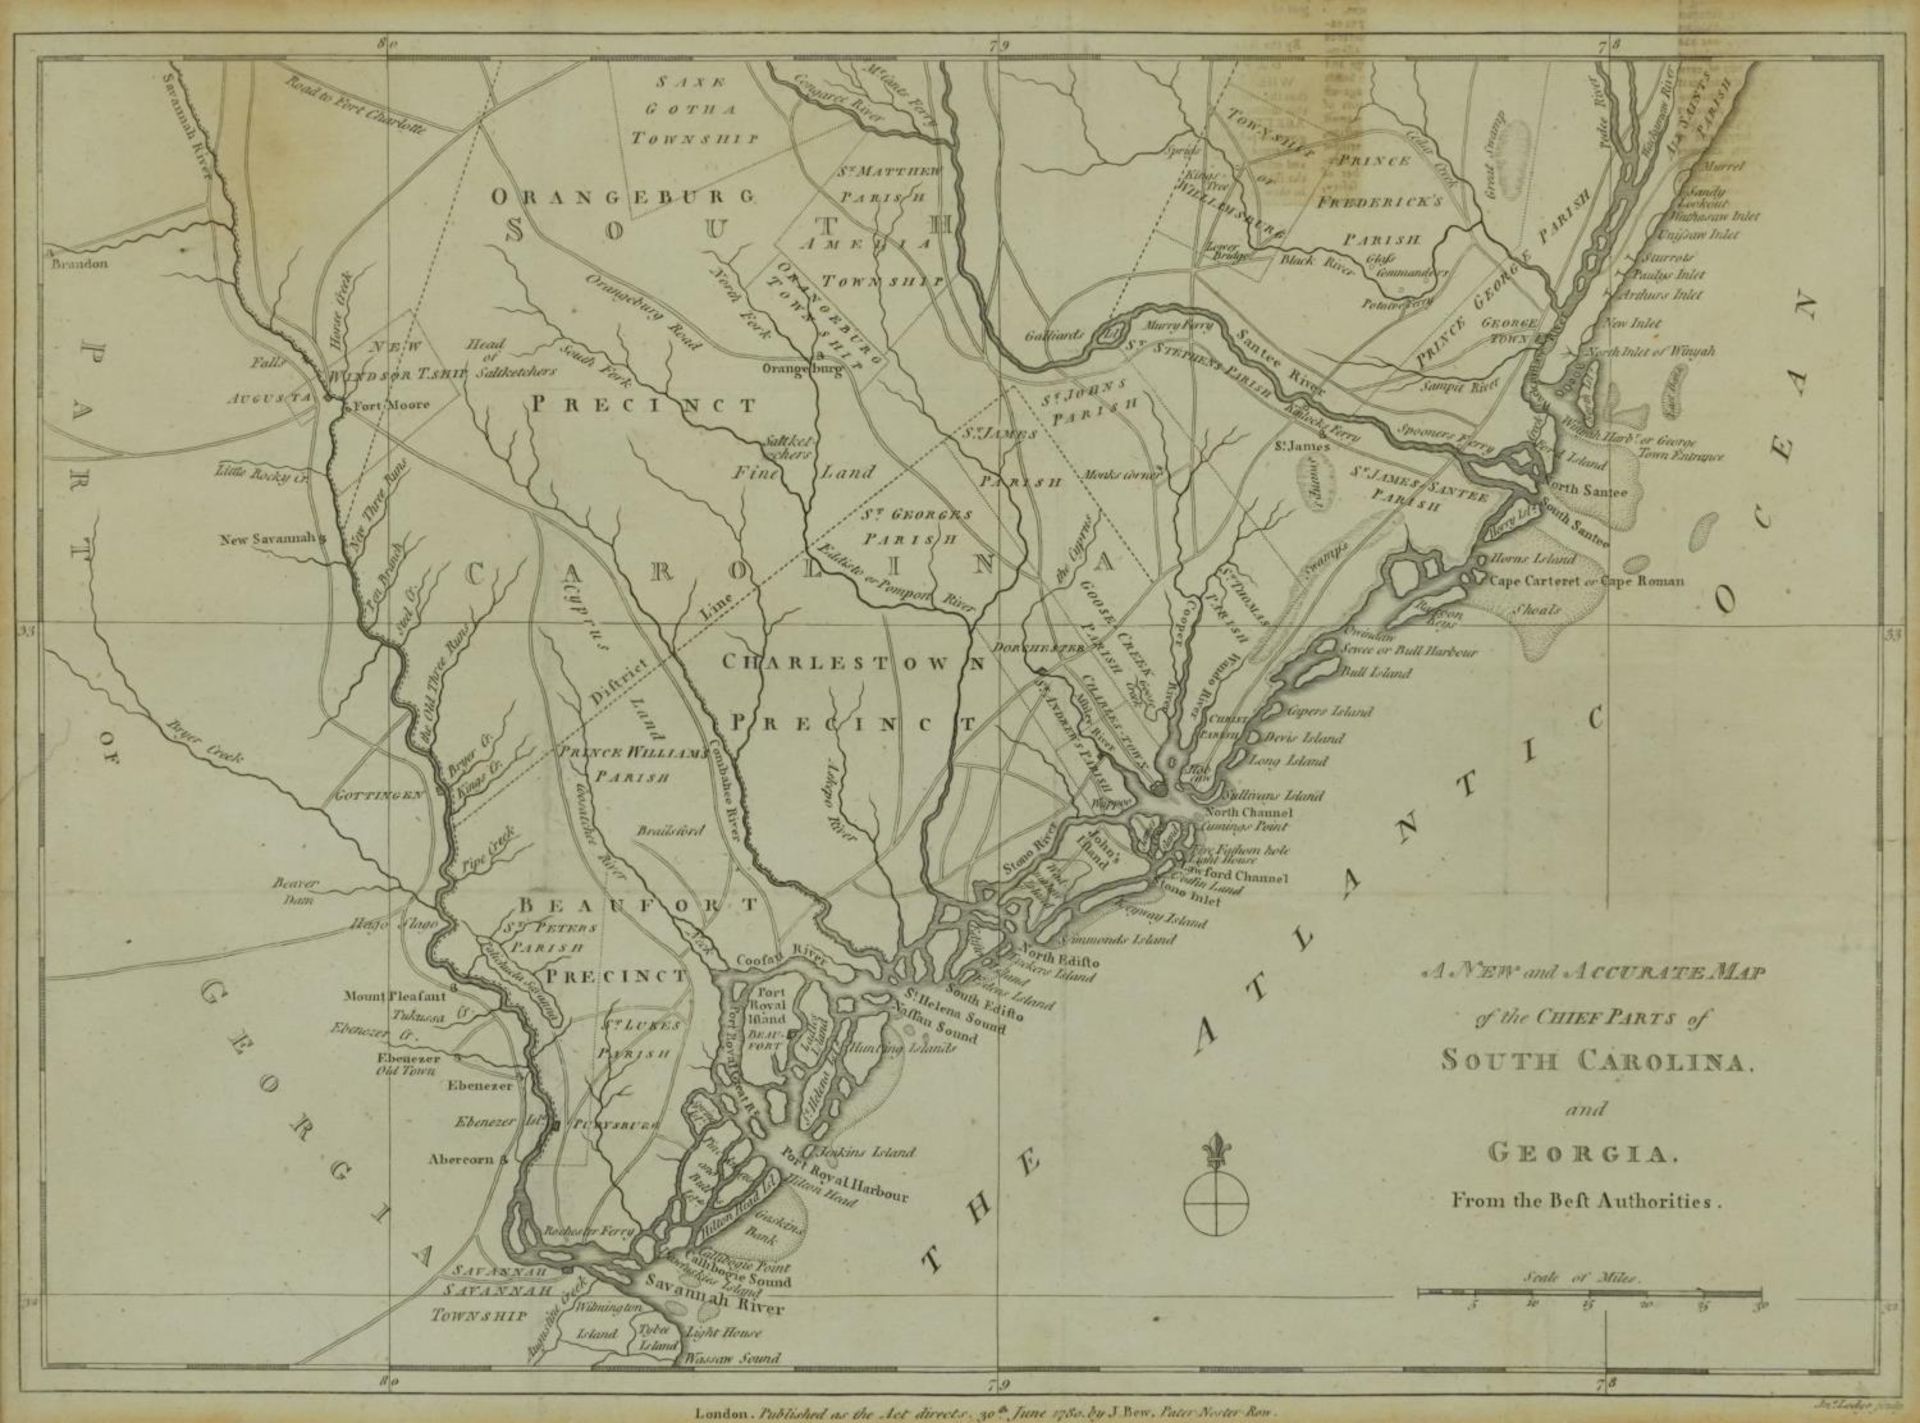 New and Accurate Map of The Chief Parts of South Caroline and Georgia, 18th century map published